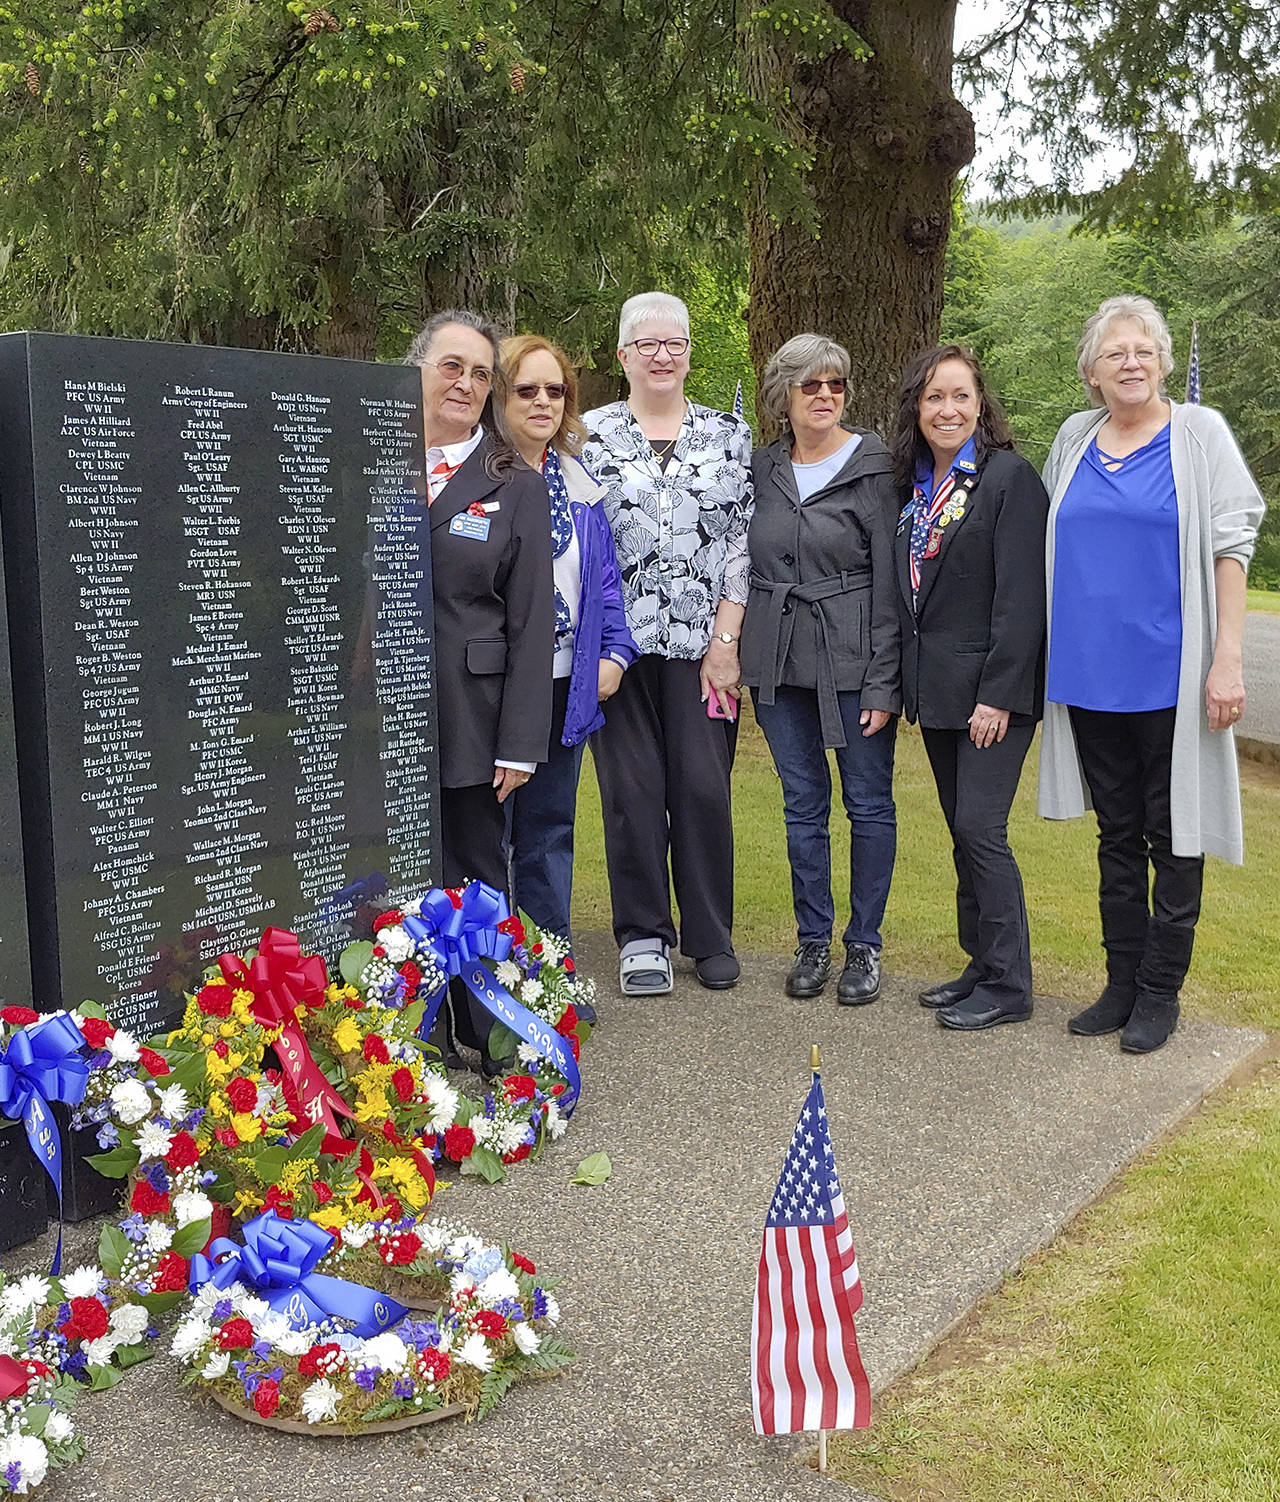 Courtesy photo                                VFW Auxiliary members participating in the Memorial Day service May 27 included, from left: Jo Ann Wadsworth, Aberdeen Auxiliary president; Joan Murphy Nihart, Washington State Auxiliary guard; Lois Daly; Pam Burns; and Kerry Mumper. Aberdeen VFW Commander Anthony Magri presented the meaning of the POW table during the service at Fern Hill Cemetery.